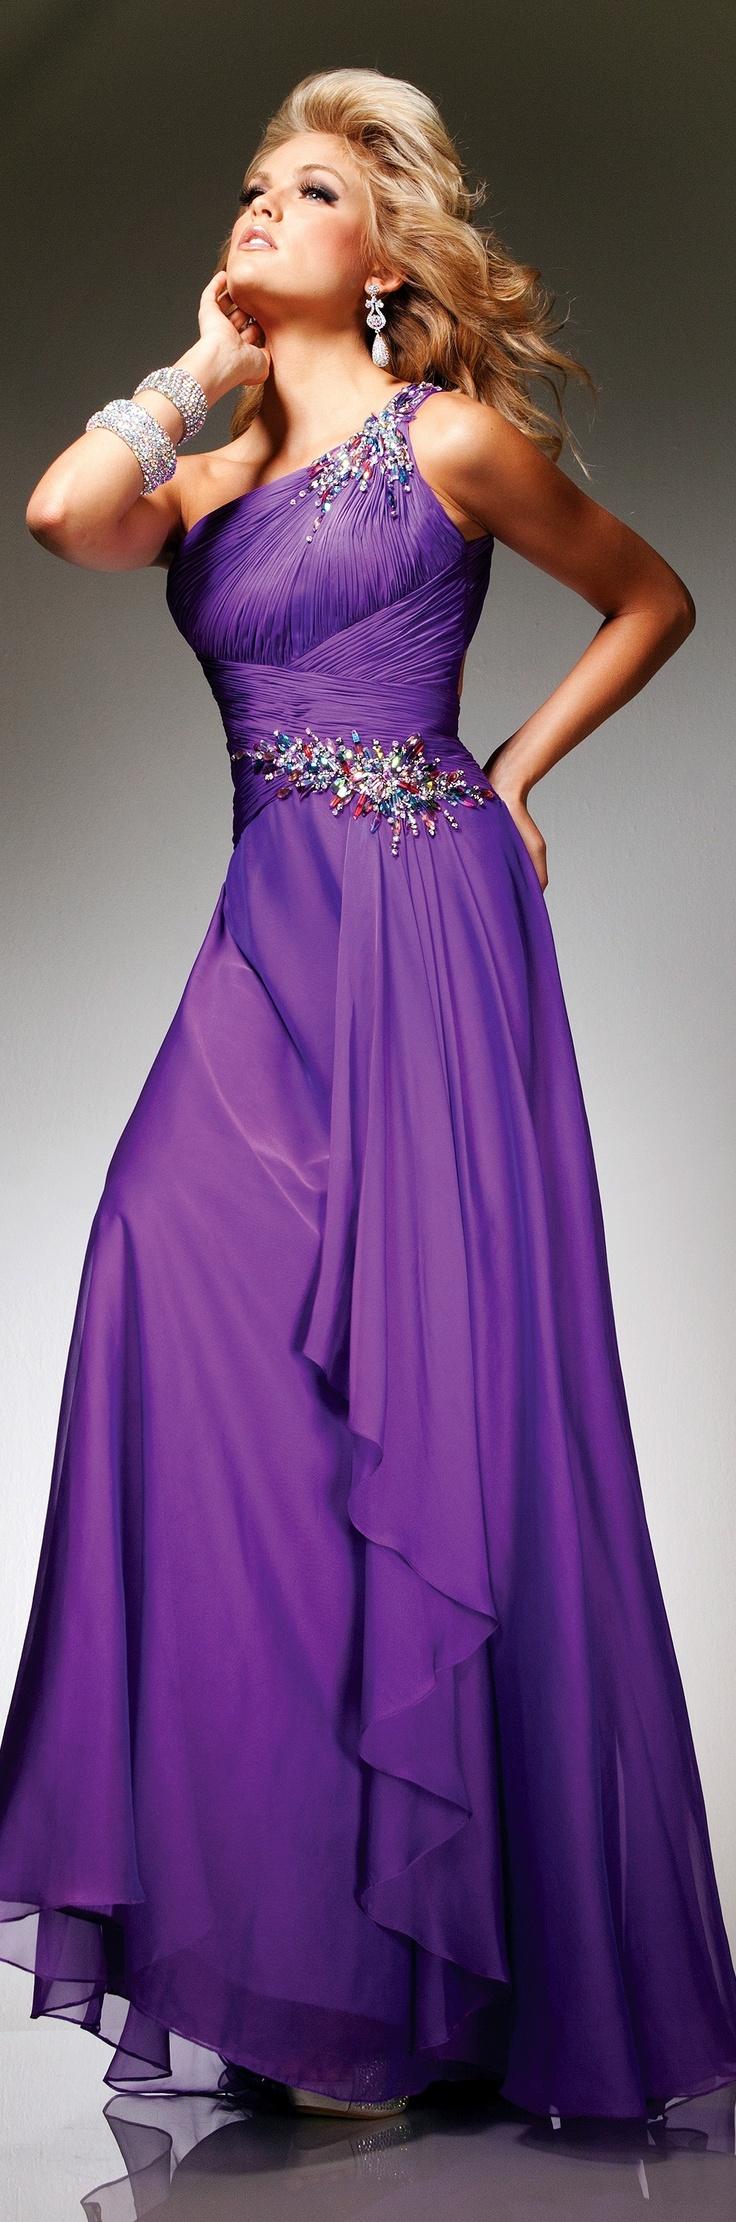 Wedding - Colorful Wedding Dress & Evening Gowns& Cocktail Dress